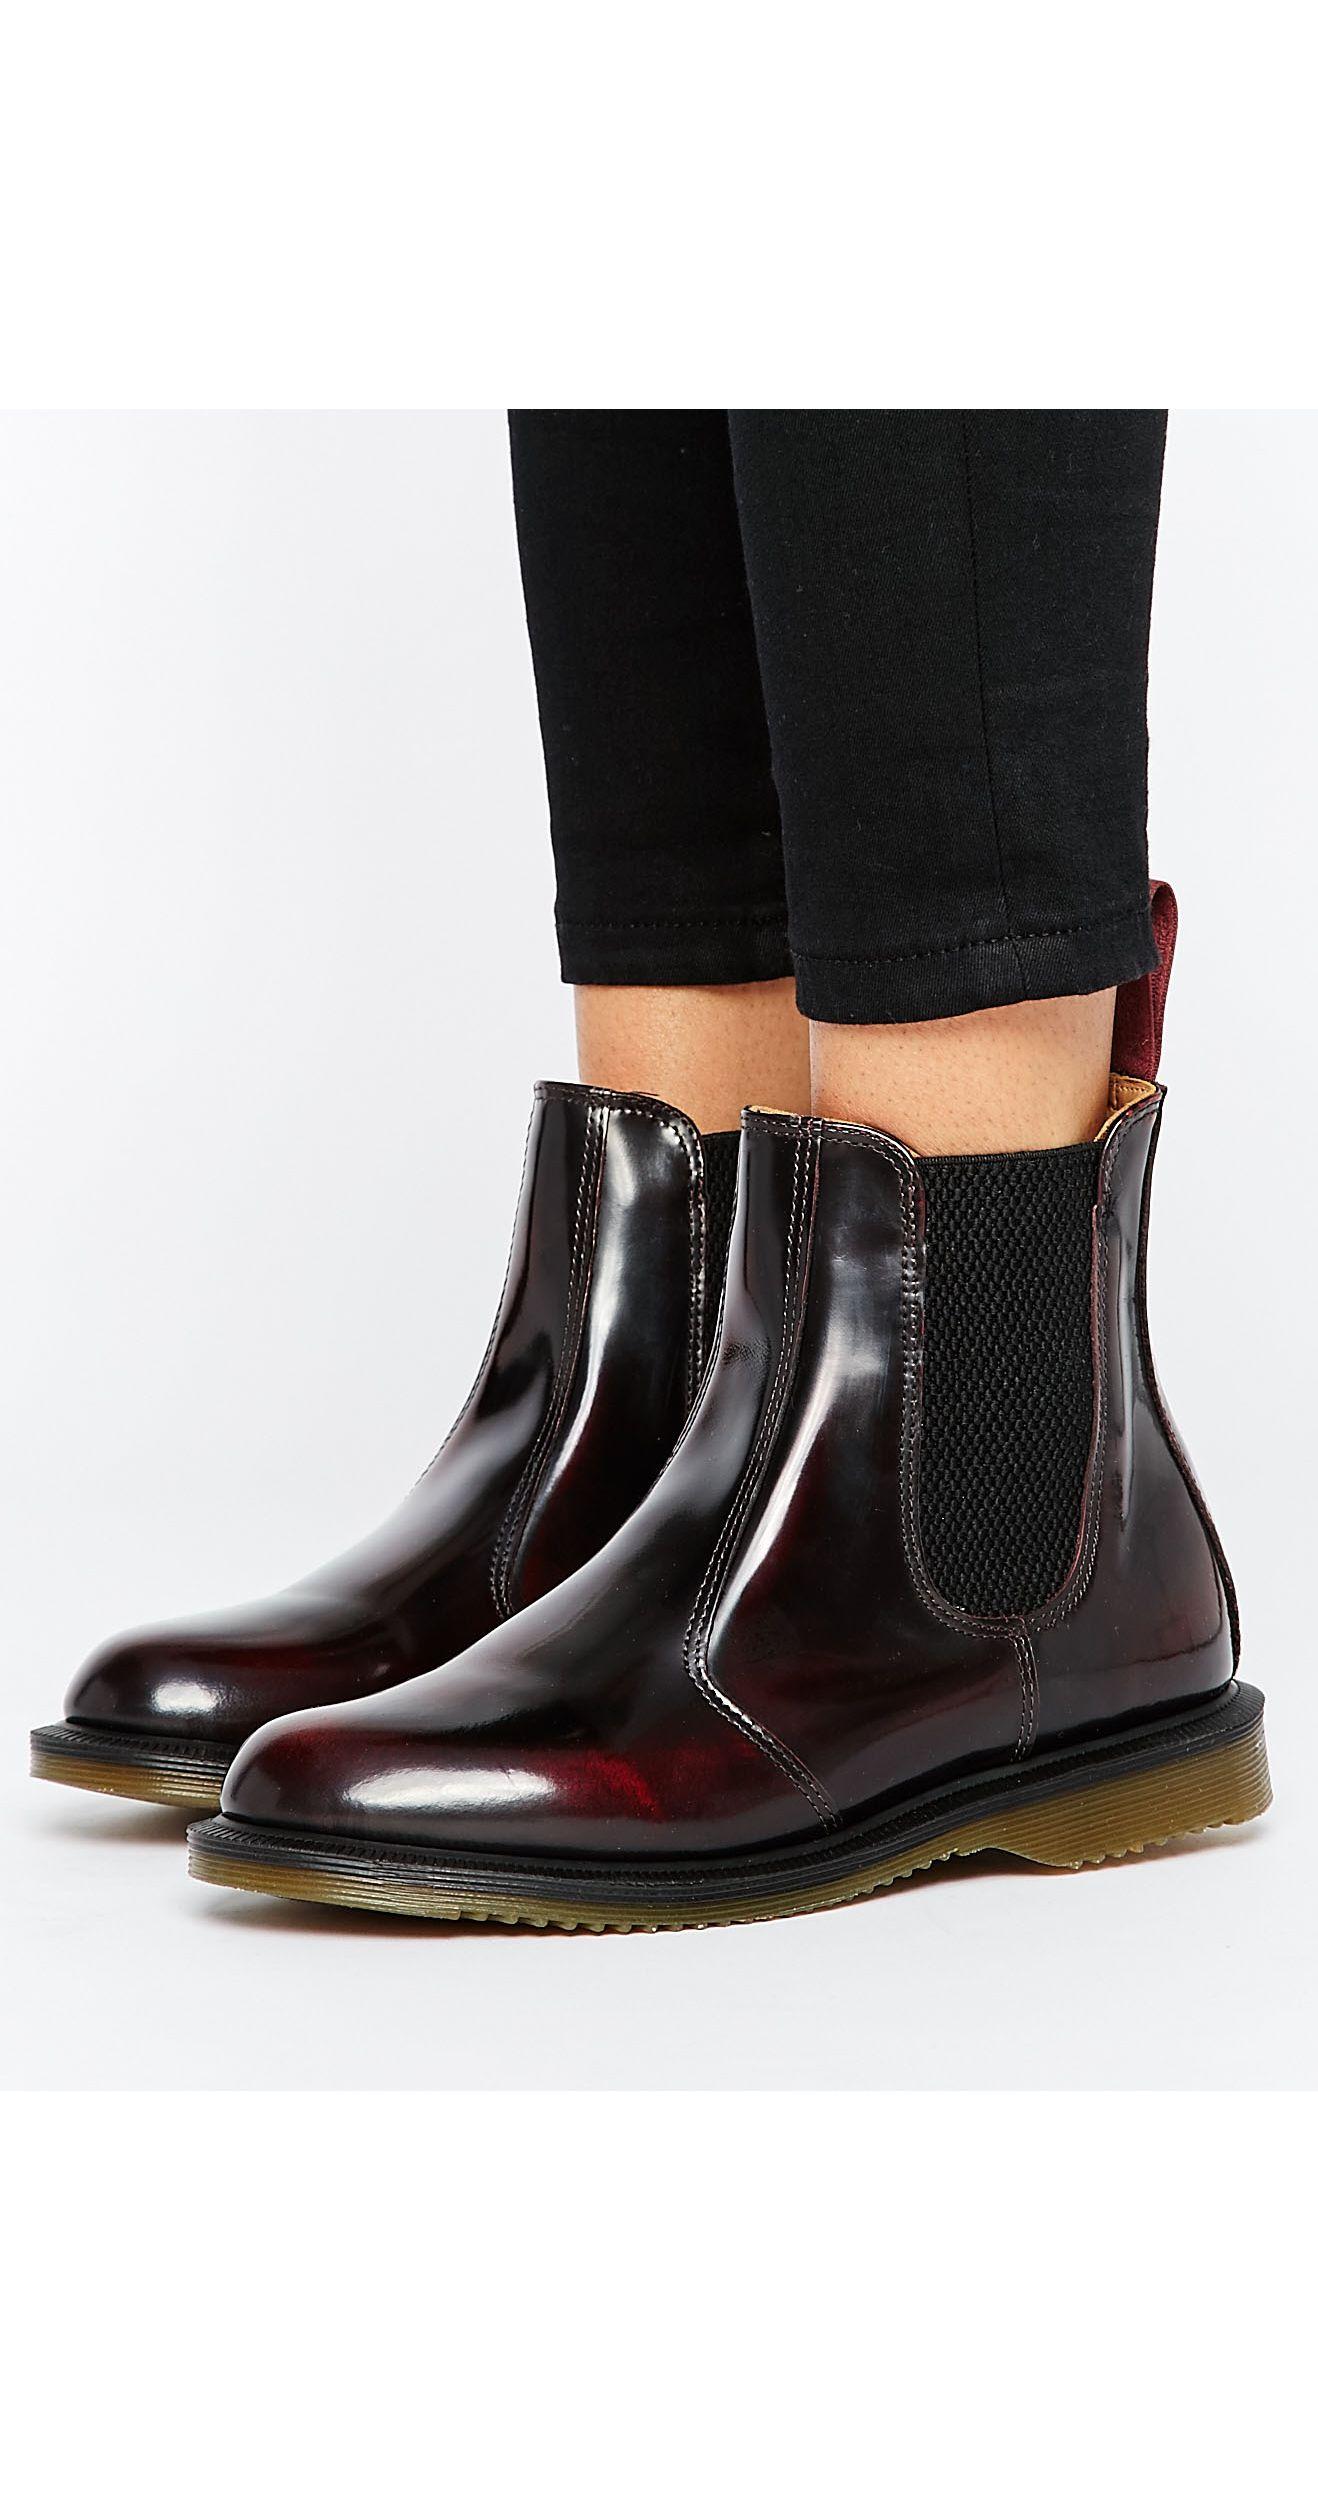 Dr. Martens Leather Kensington Flora Burgundy Chelsea Boots in Red | Lyst